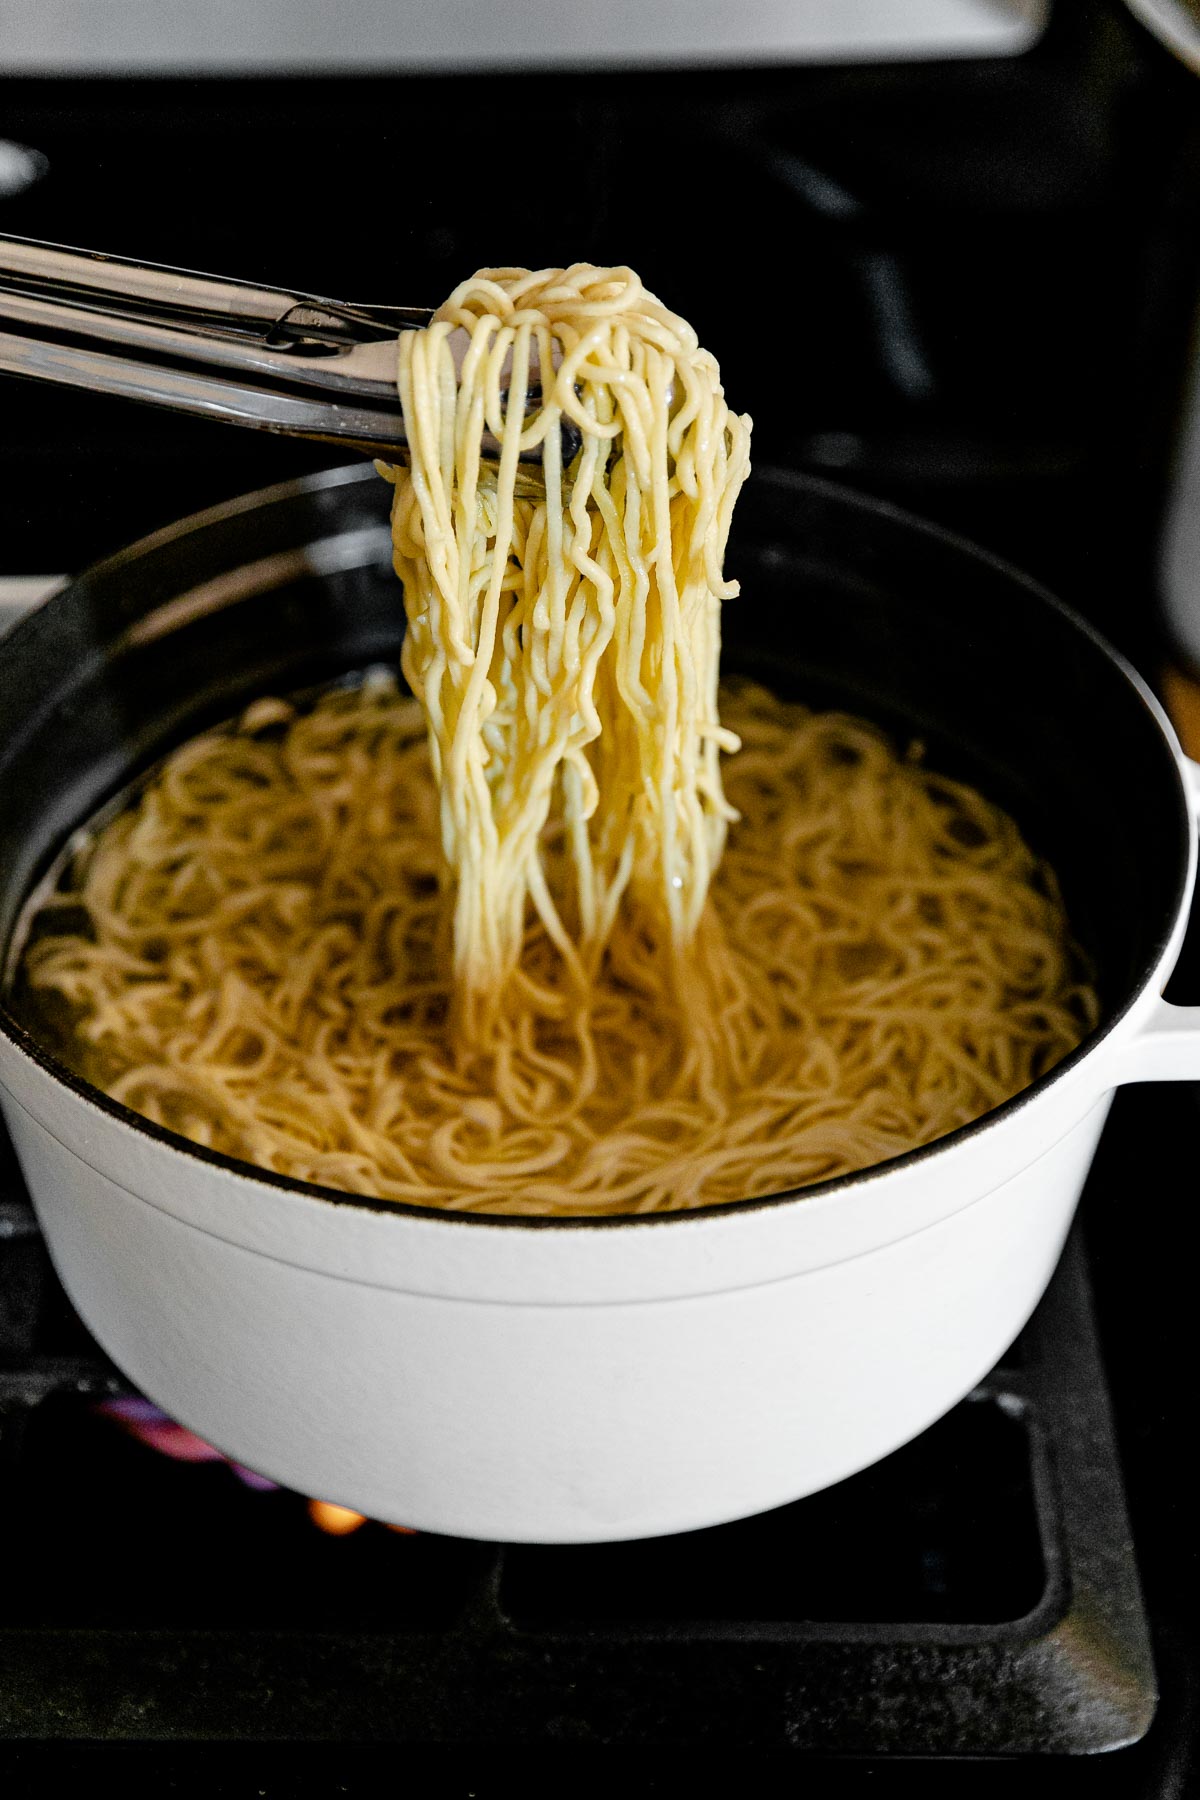 Tongs are used to pick up a bundle of fresh homemade pasta and hold it up over a white pot filled with boiling water and more fresh pasta as it cooks. The pot rests atop a gas stovetop range.